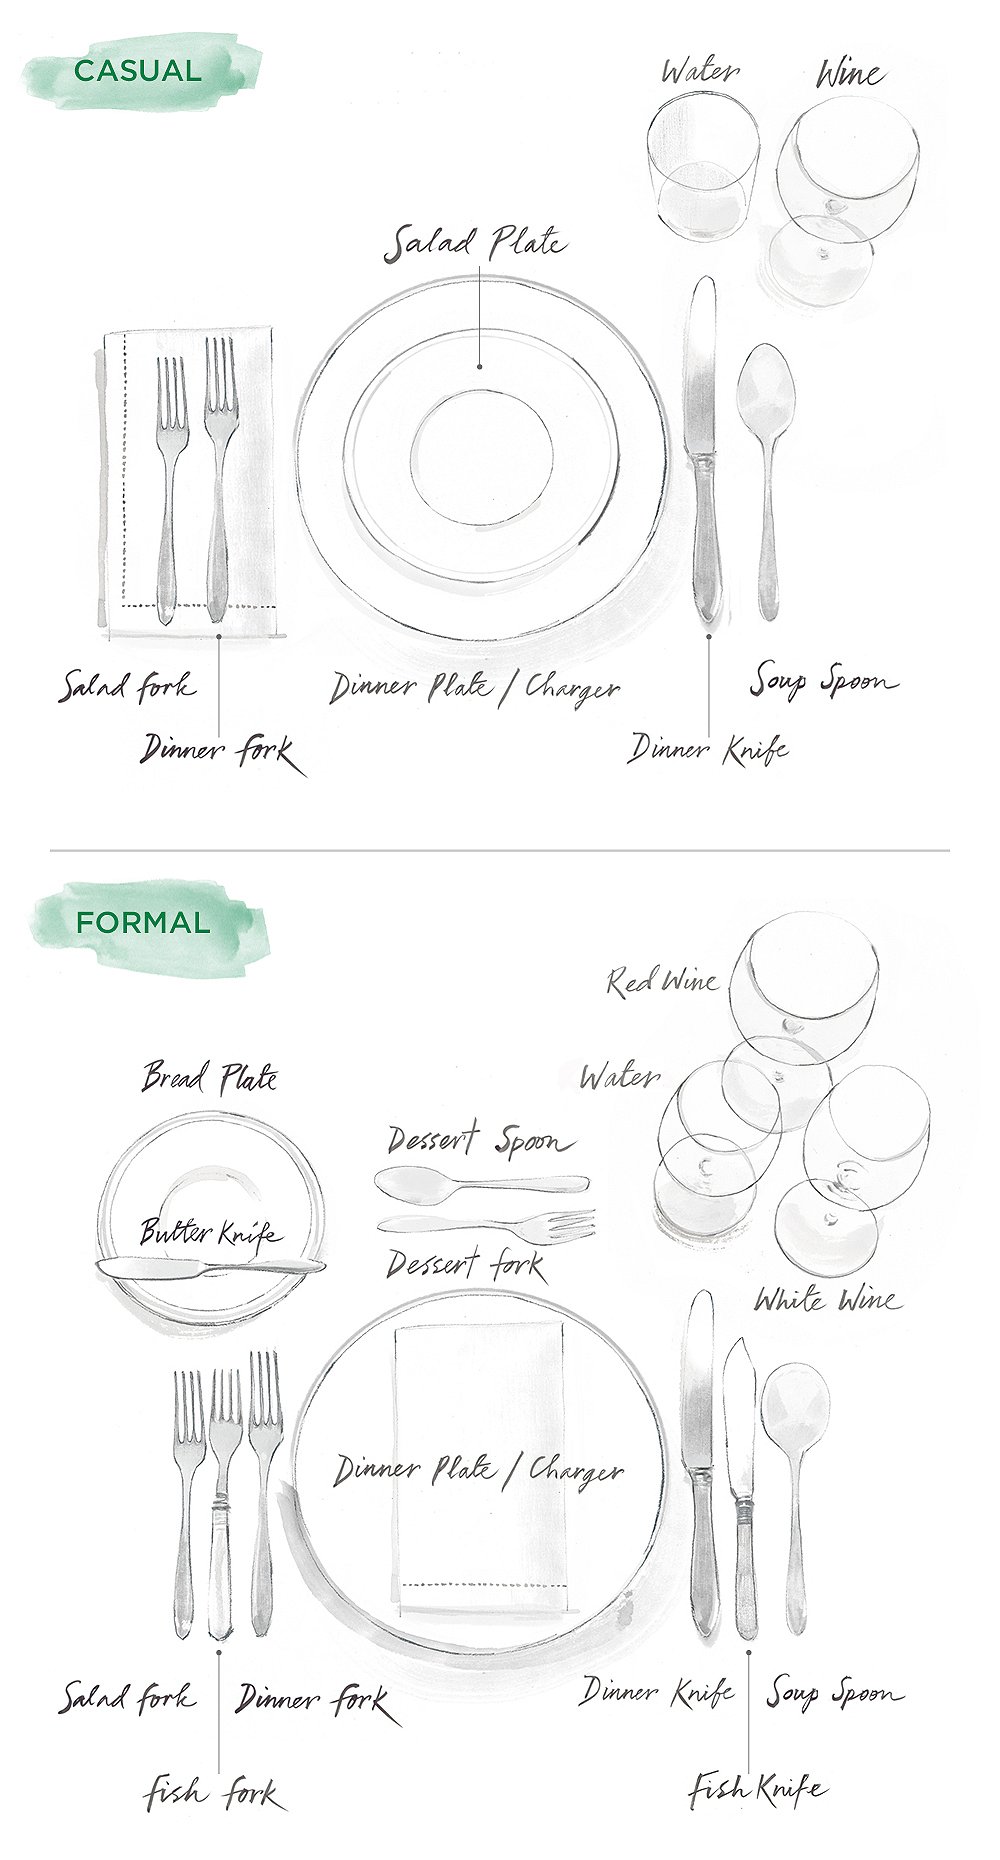 How To Survive a Formal Dinner - Cheat Sheet #1 - Is That My Glass